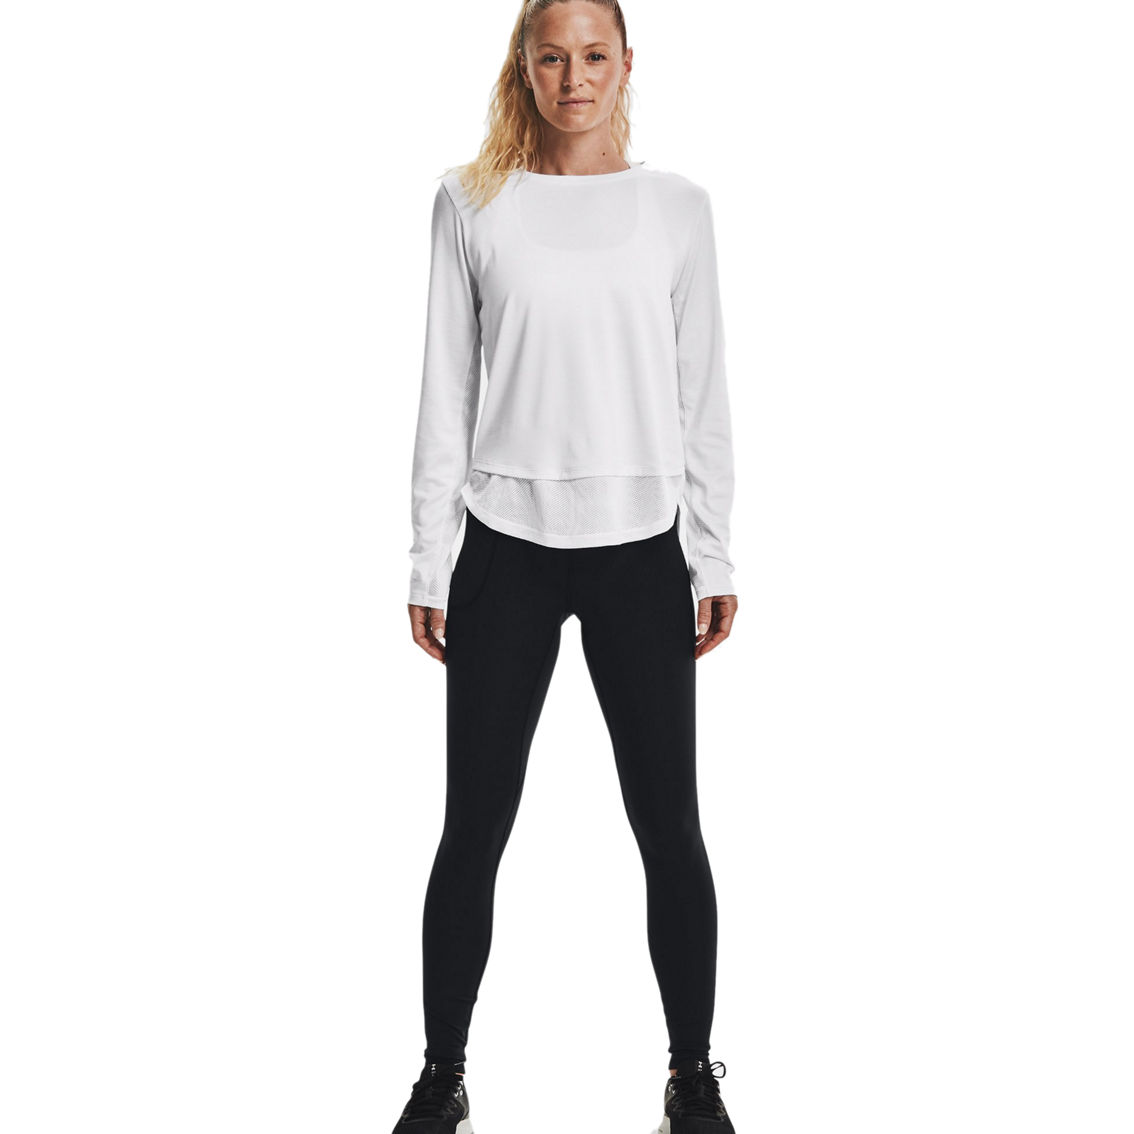 Under Armour Motion Leggings - Image 3 of 6